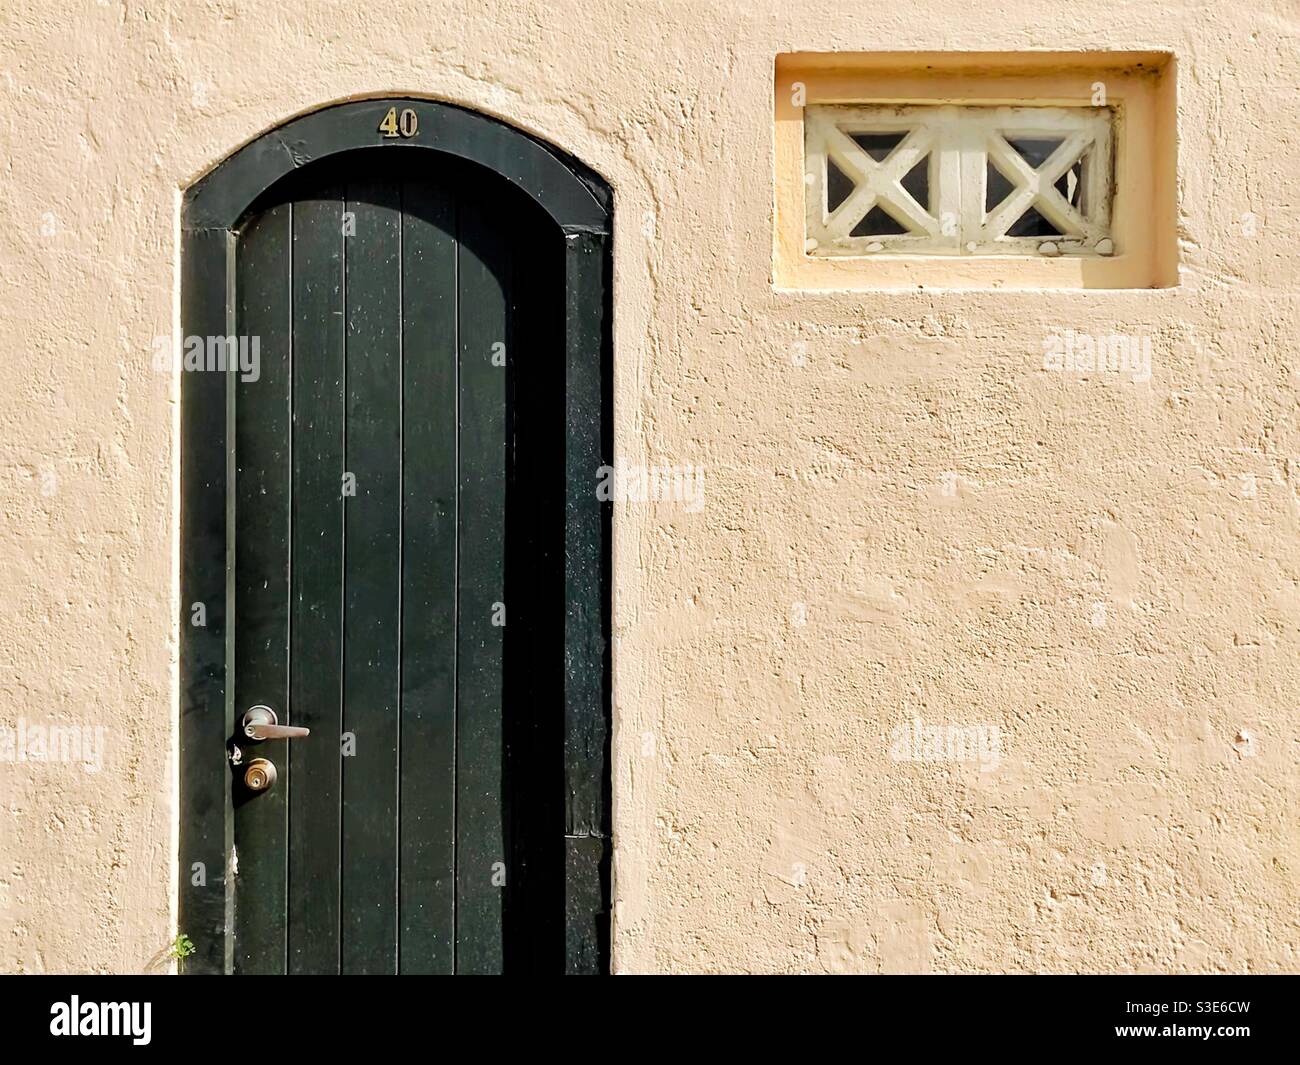 Plain and simple door and window Stock Photo